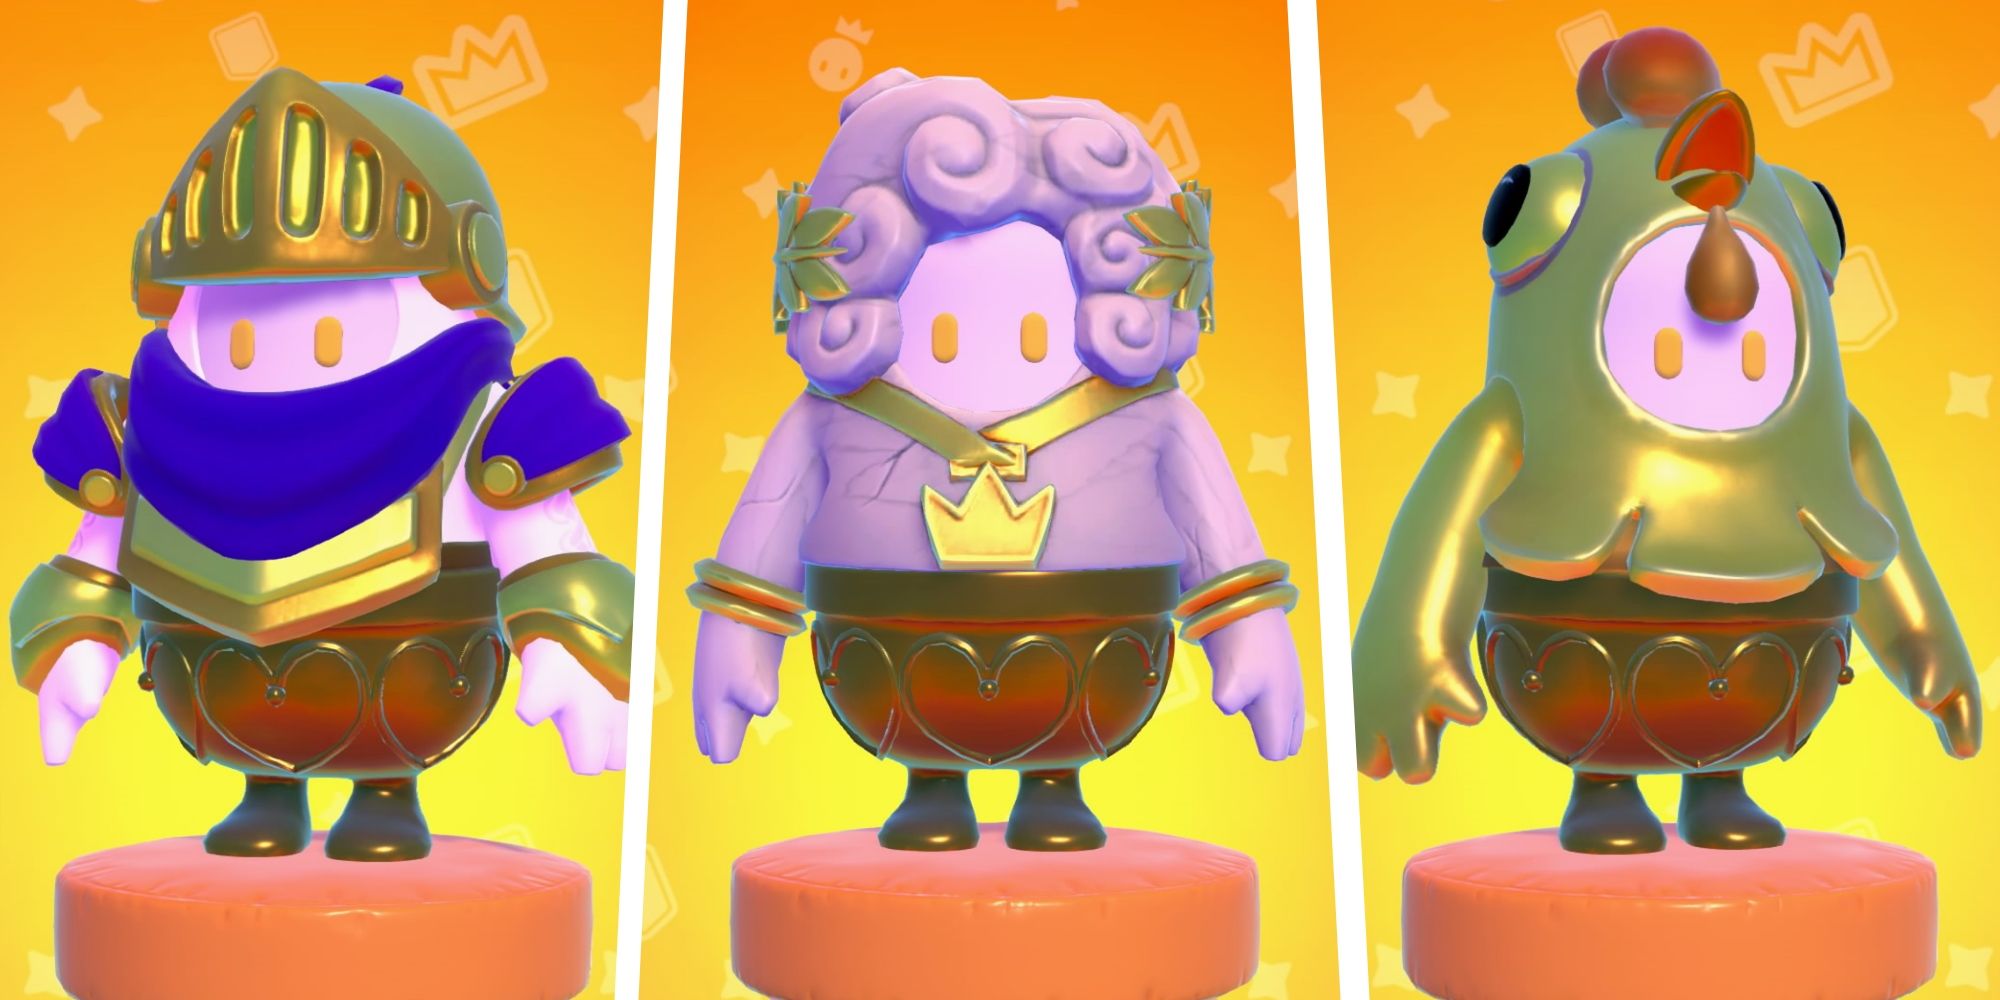 Golden Knight, Marblellous, and Golden Chicken costumes from Fall Guys